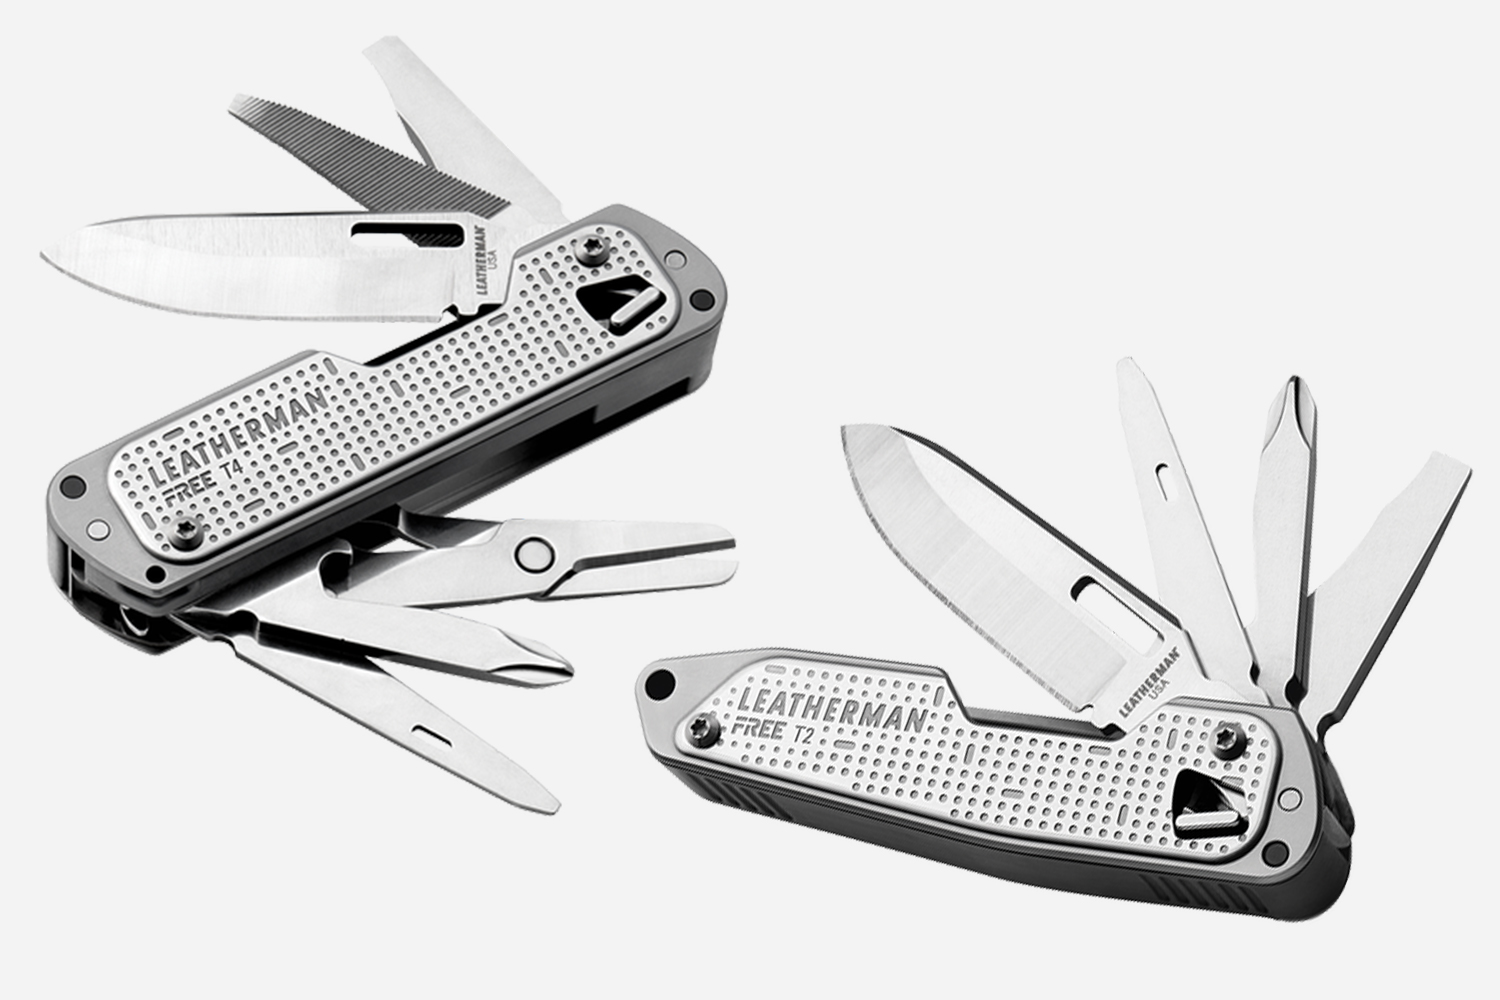 Leatherman T-Series Free Collection Multitool